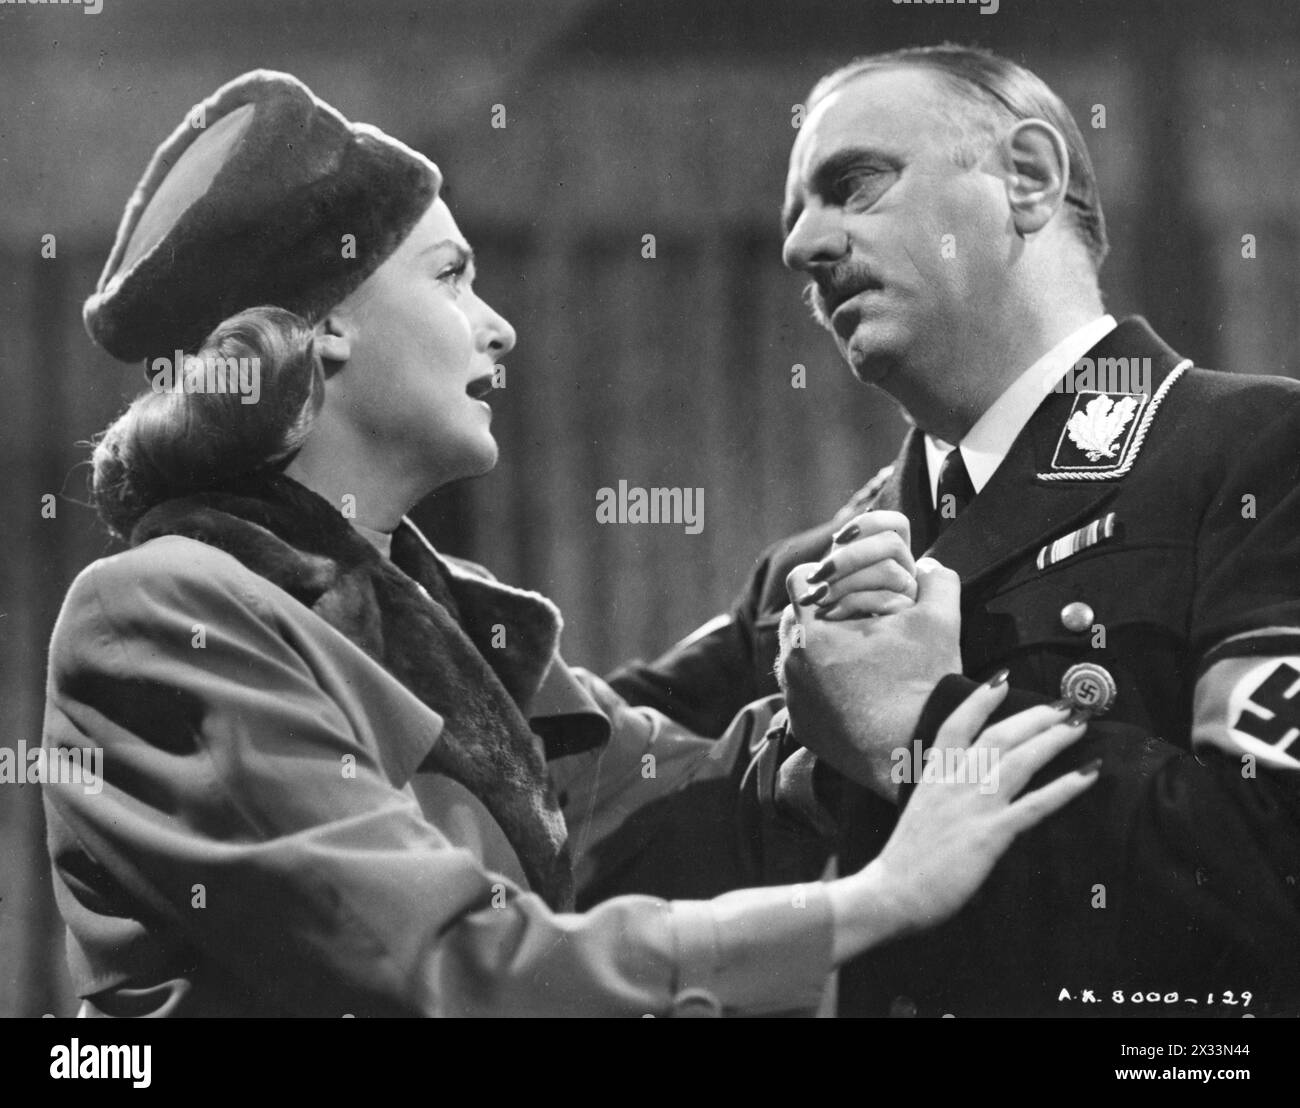 CAROLE LOMBARD and SIG RUMAN in a scene from TO BE OR NOT TO BE 1942 Produced and Directed by ERNST LUBITSCH Story MELCHIOR LENGYEL Screenplay EDWIN JUSTUS MEYER Costume Design IRENE  (for Carole Lombard) Cinematographer RUDOLPH MATE Production Design VINCENT KORDA  Music WERNER R HEYMANN  Photograph by COBURN  Presented by ALEXANDER KORDA  United Artists Stock Photo